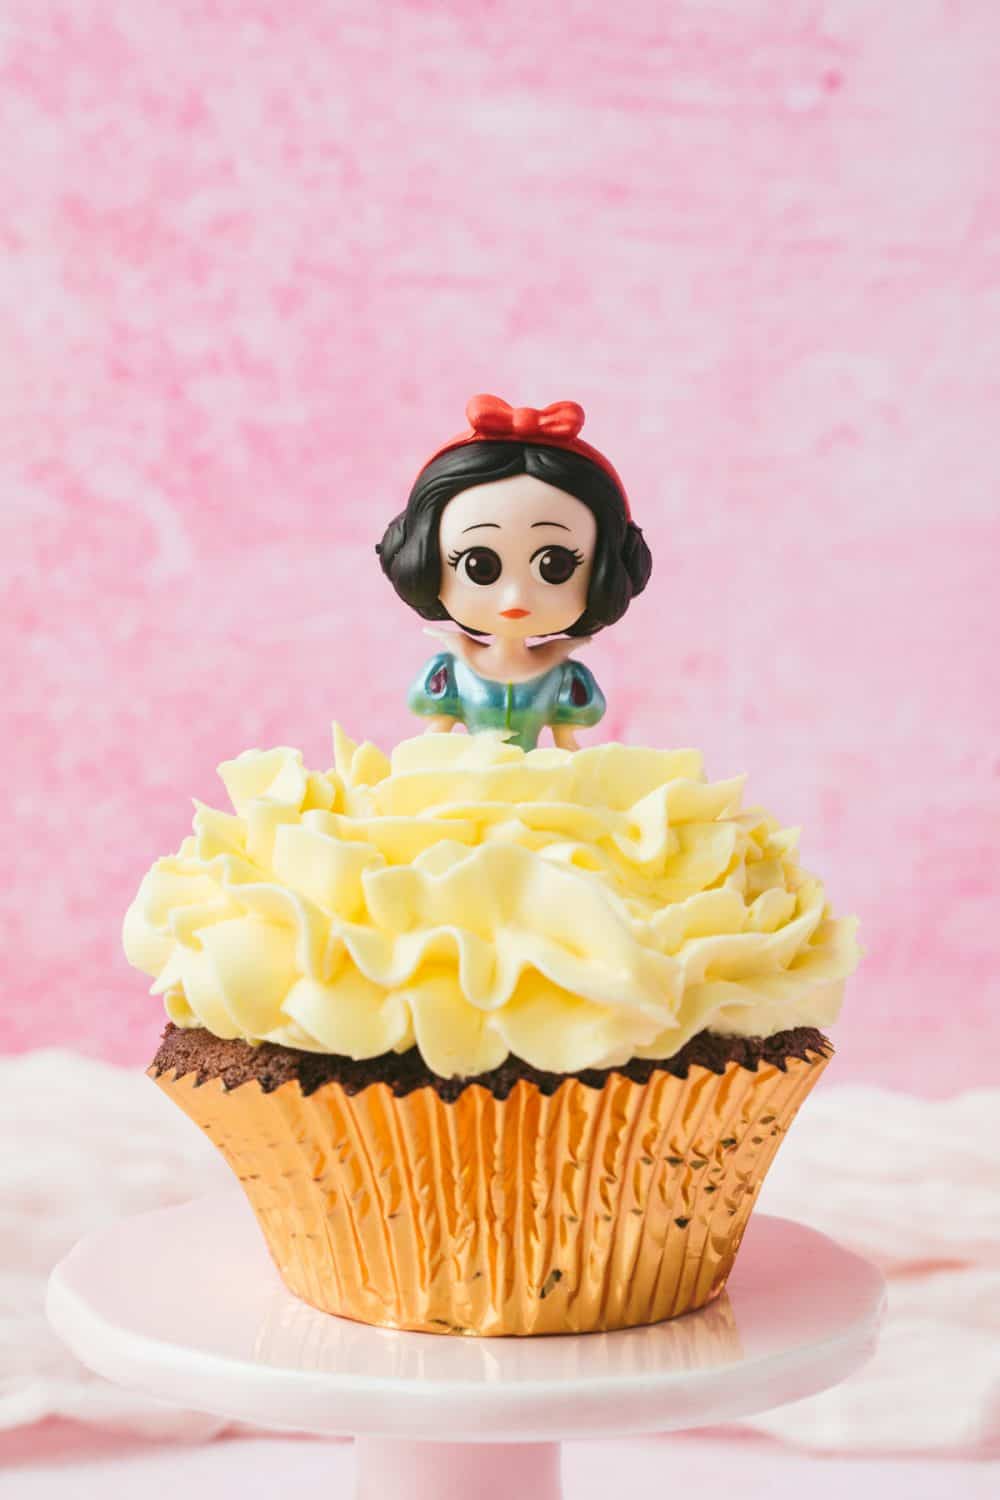 A snow white cupcake with yellow icing. 